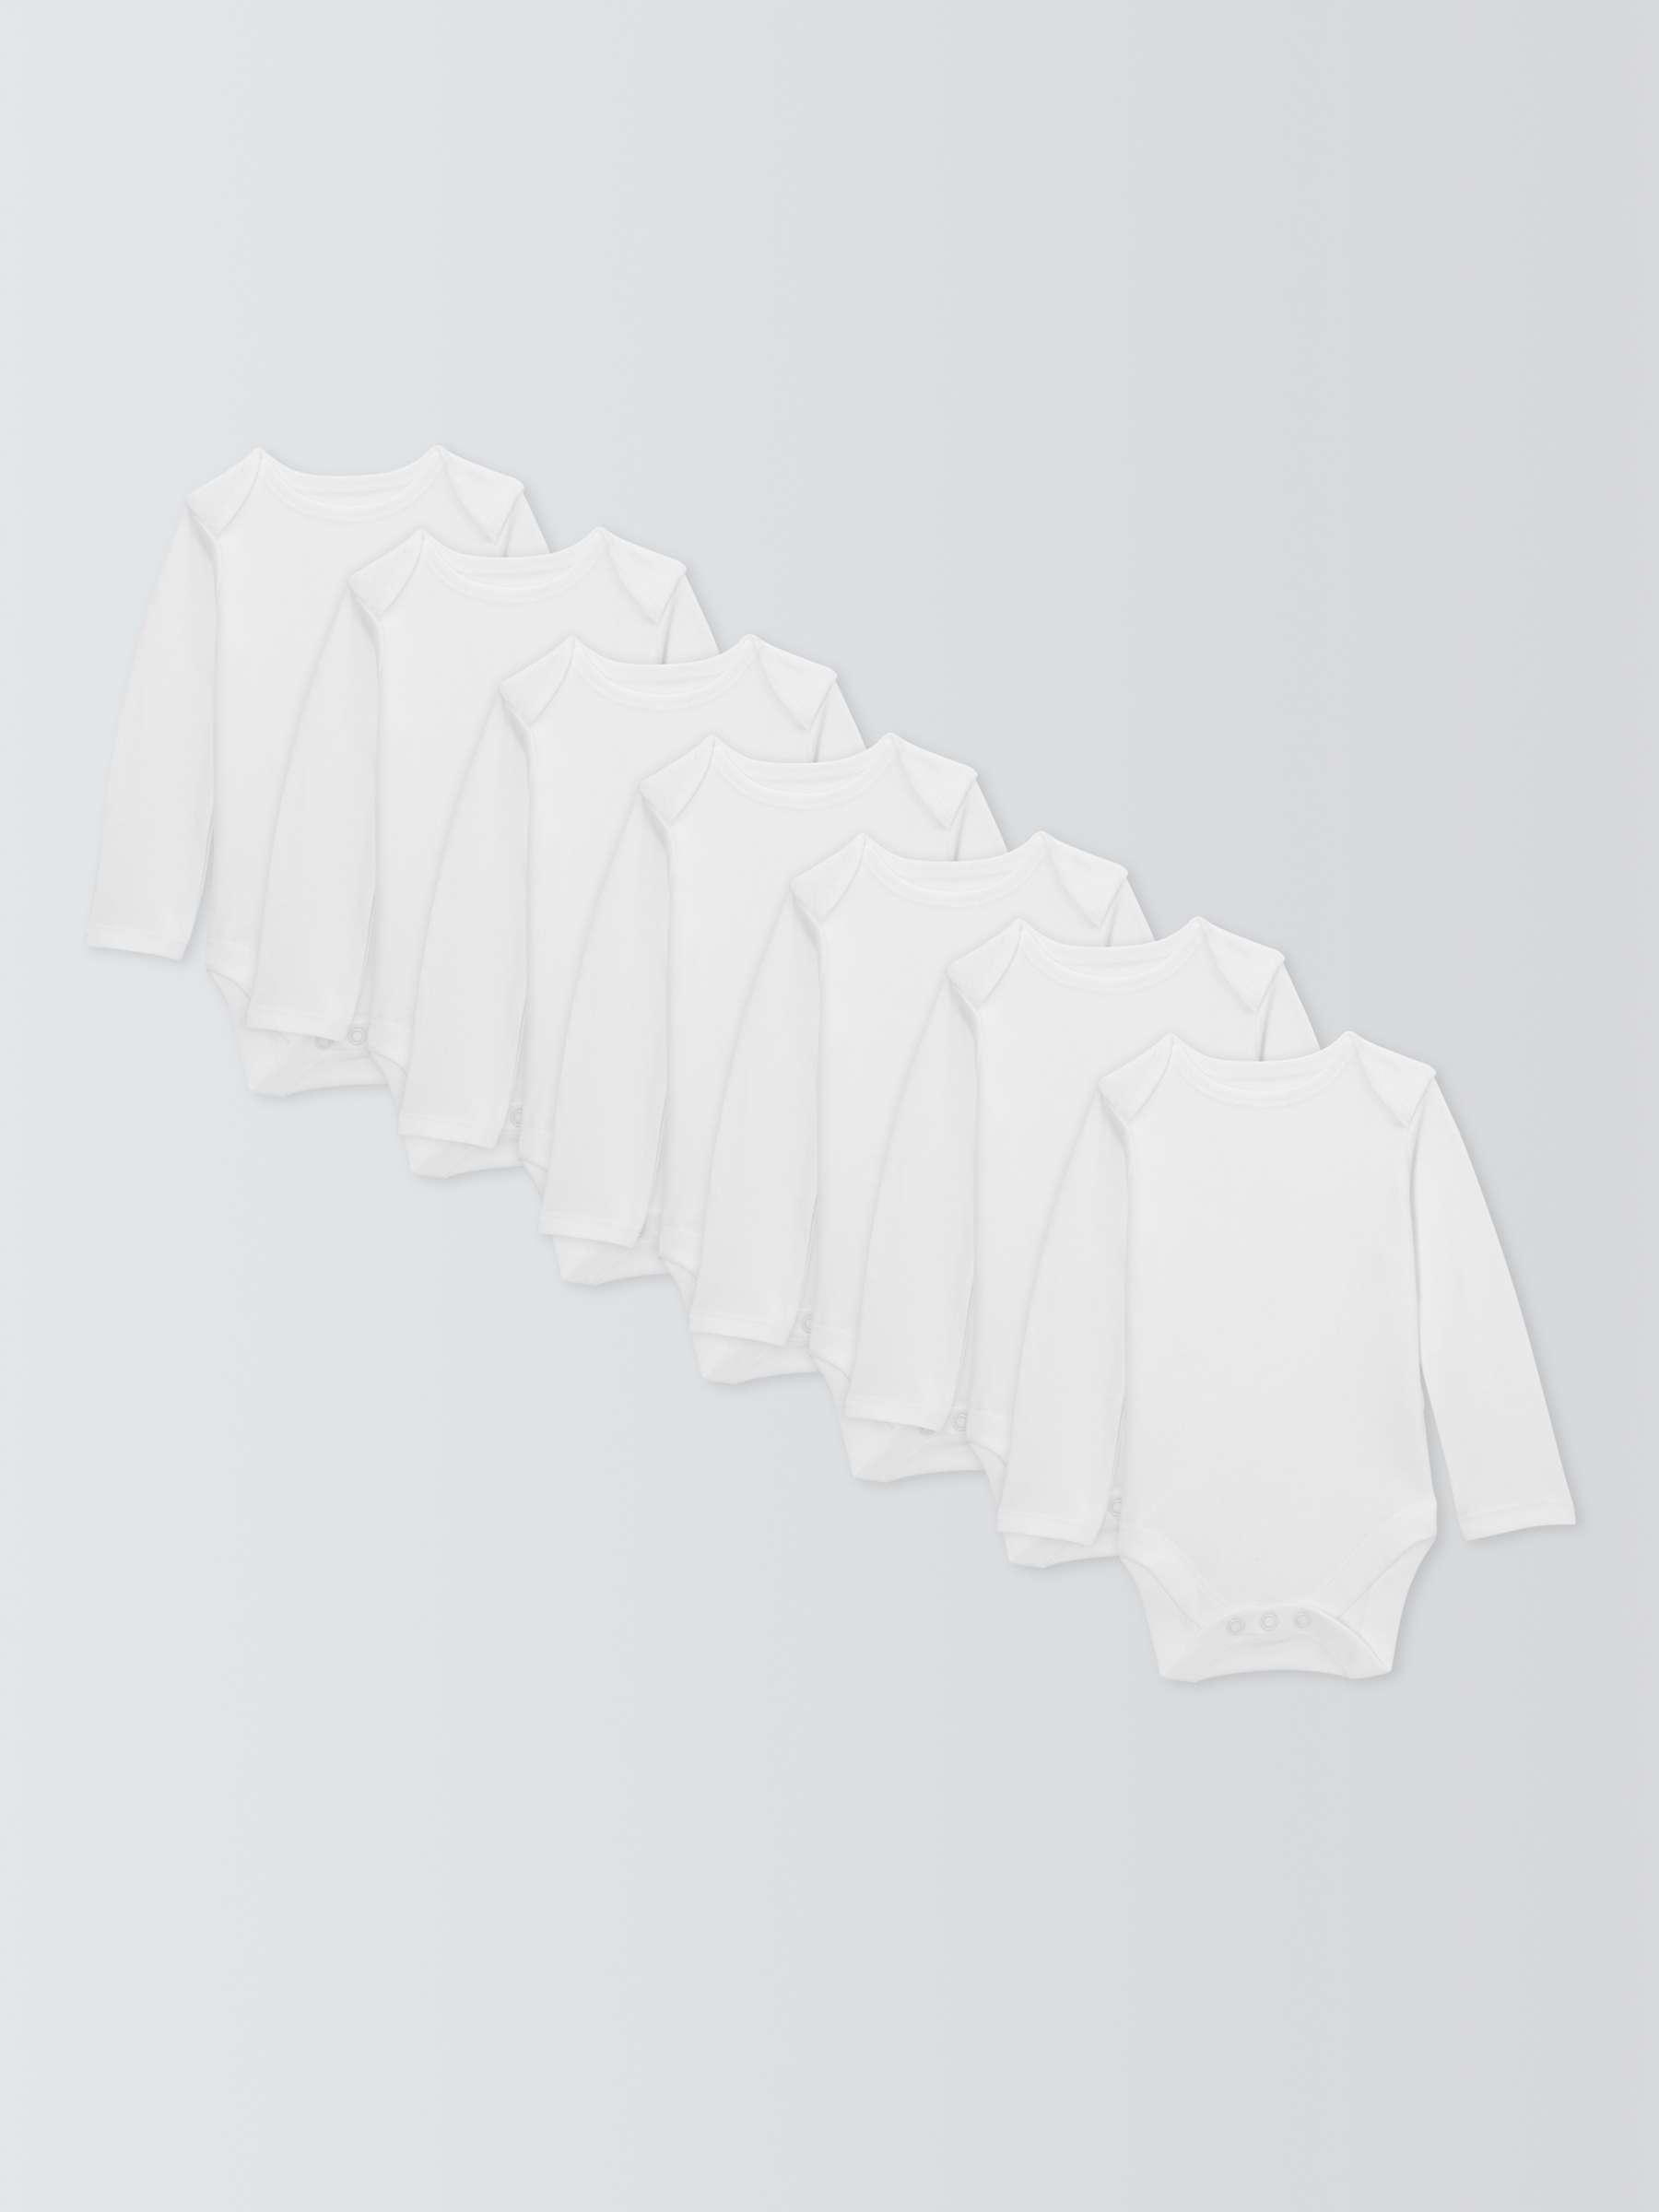 Buy John Lewis ANYDAY Baby Long Sleeve Bodysuits, Pack of 7, White Online at johnlewis.com